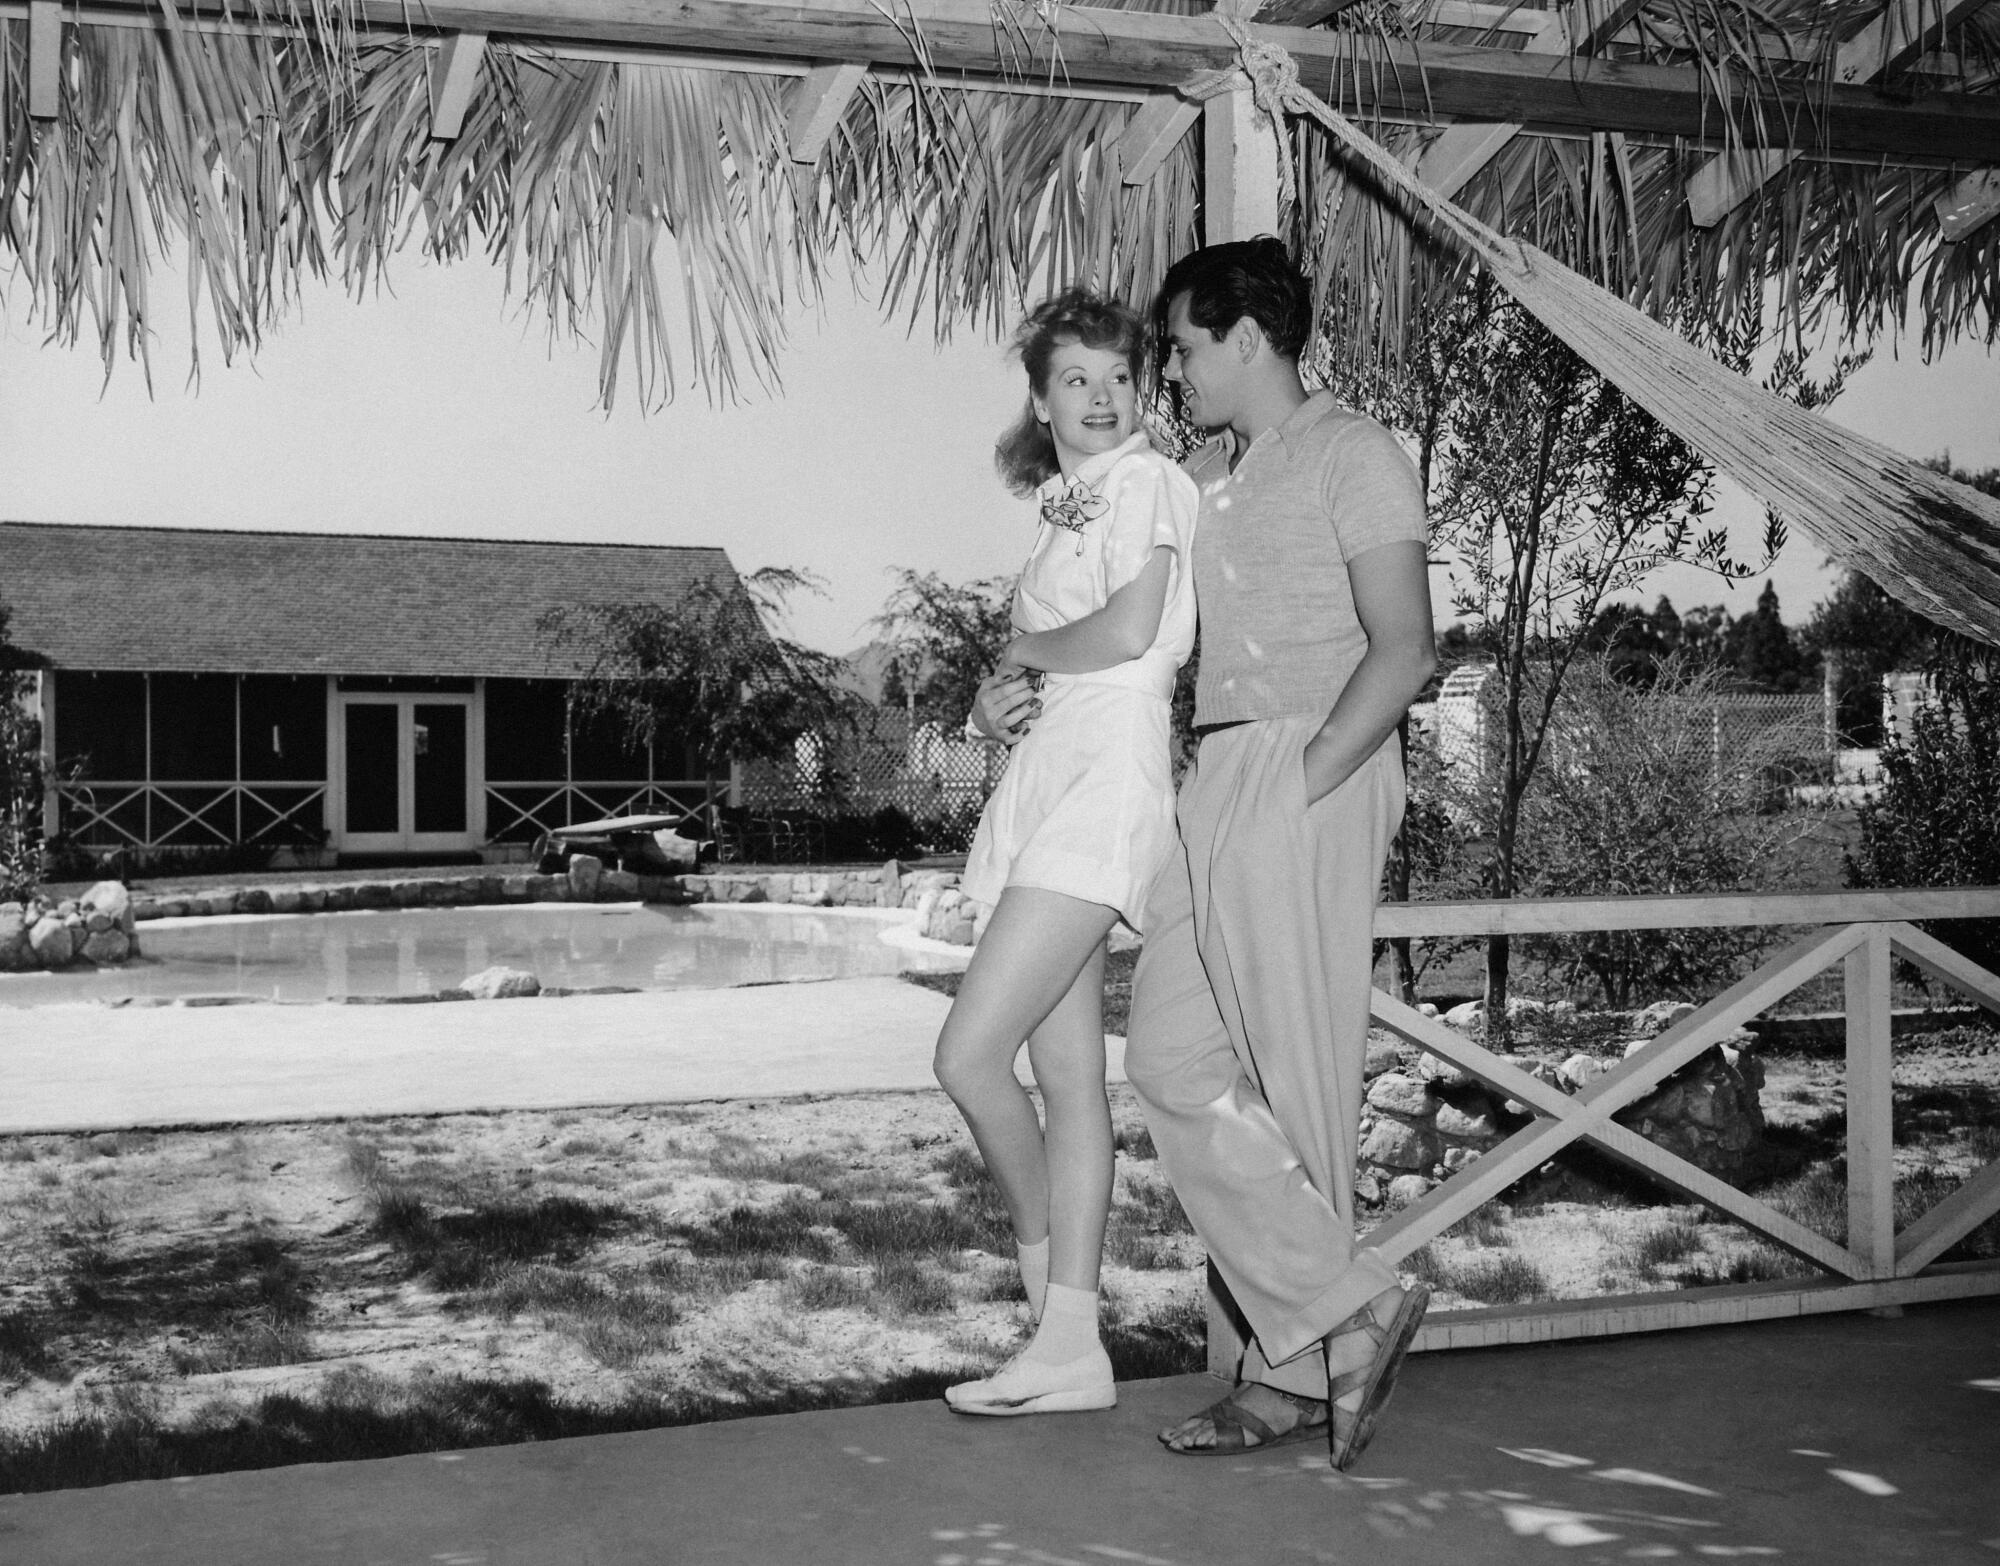 A 1942 photograph of Lucille Ball and Desi Arnaz standing together in front of their home.